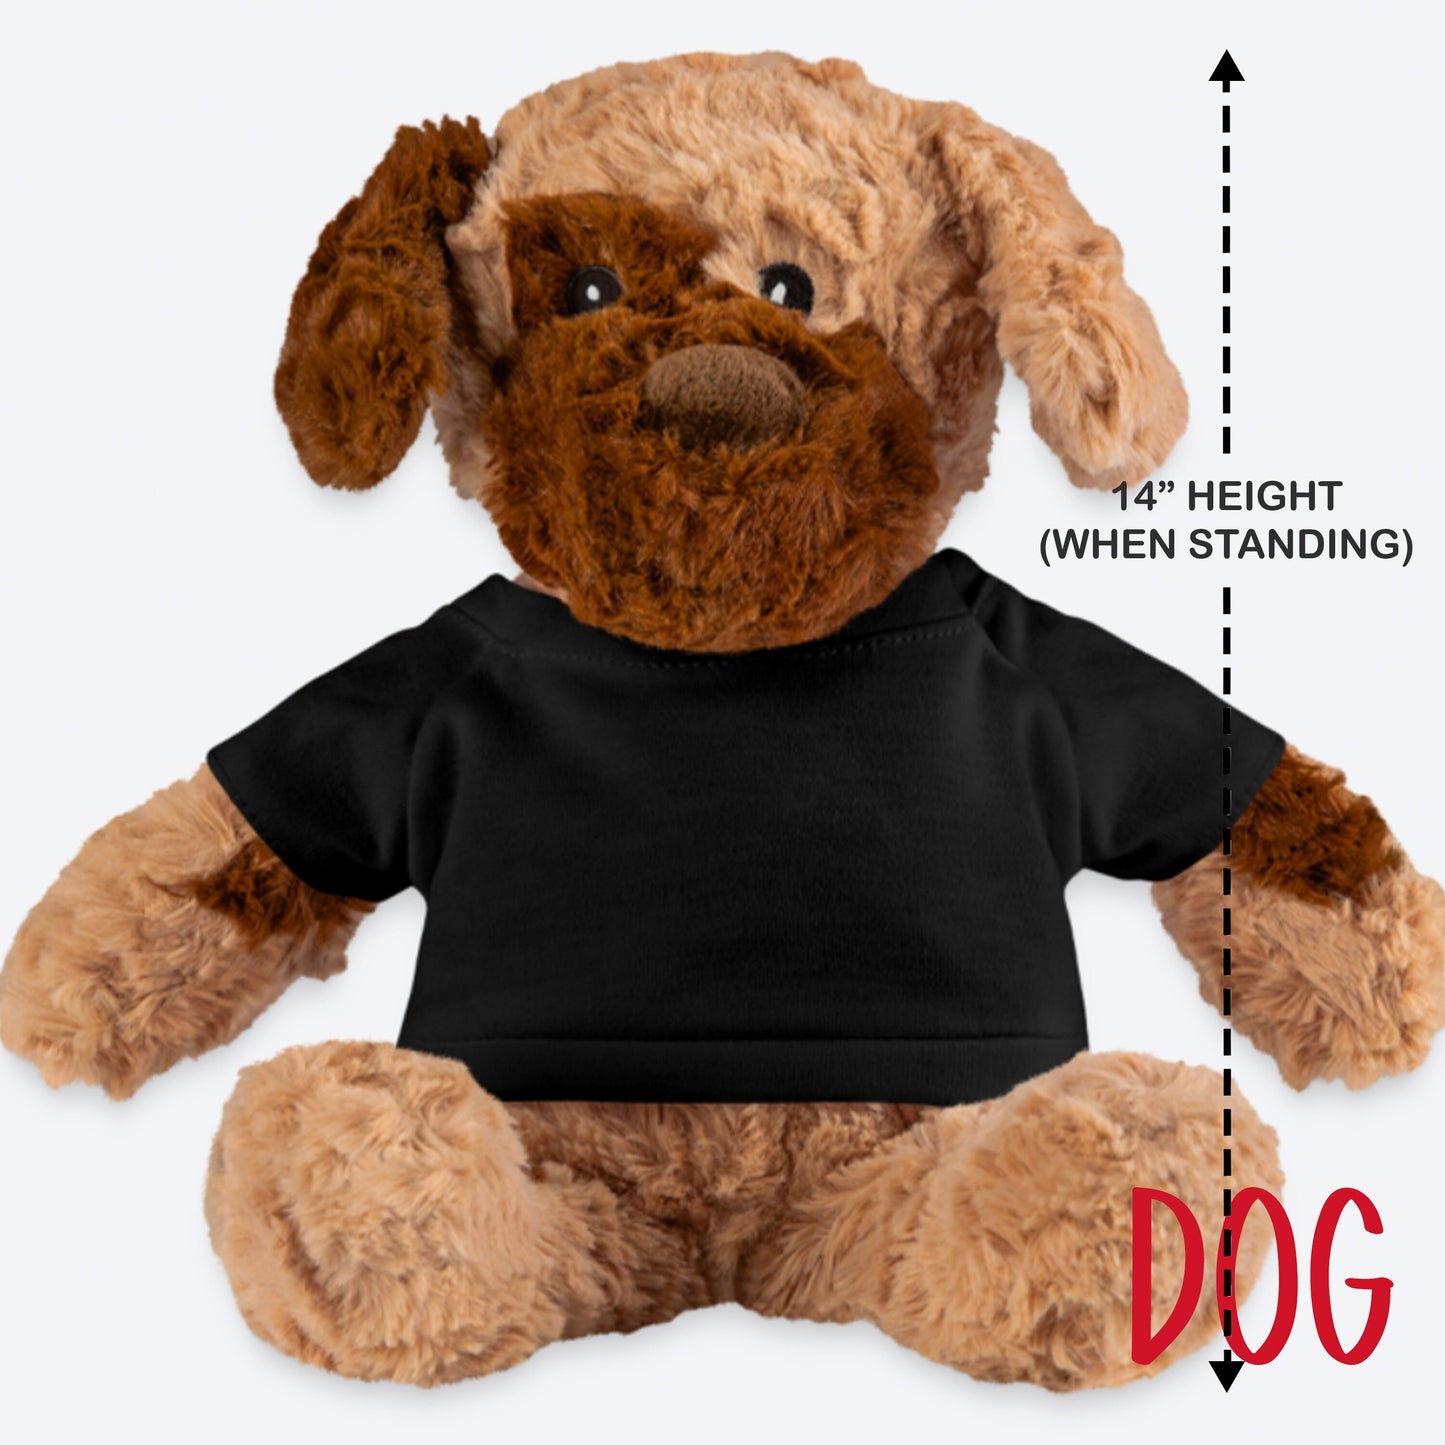 Teddy In A TShirt Personalized Bear Gift, Graduation Bear, Christmas Bear, Memorial Gift for Grandchild, Teddy Baby Shower Gift from Grandma